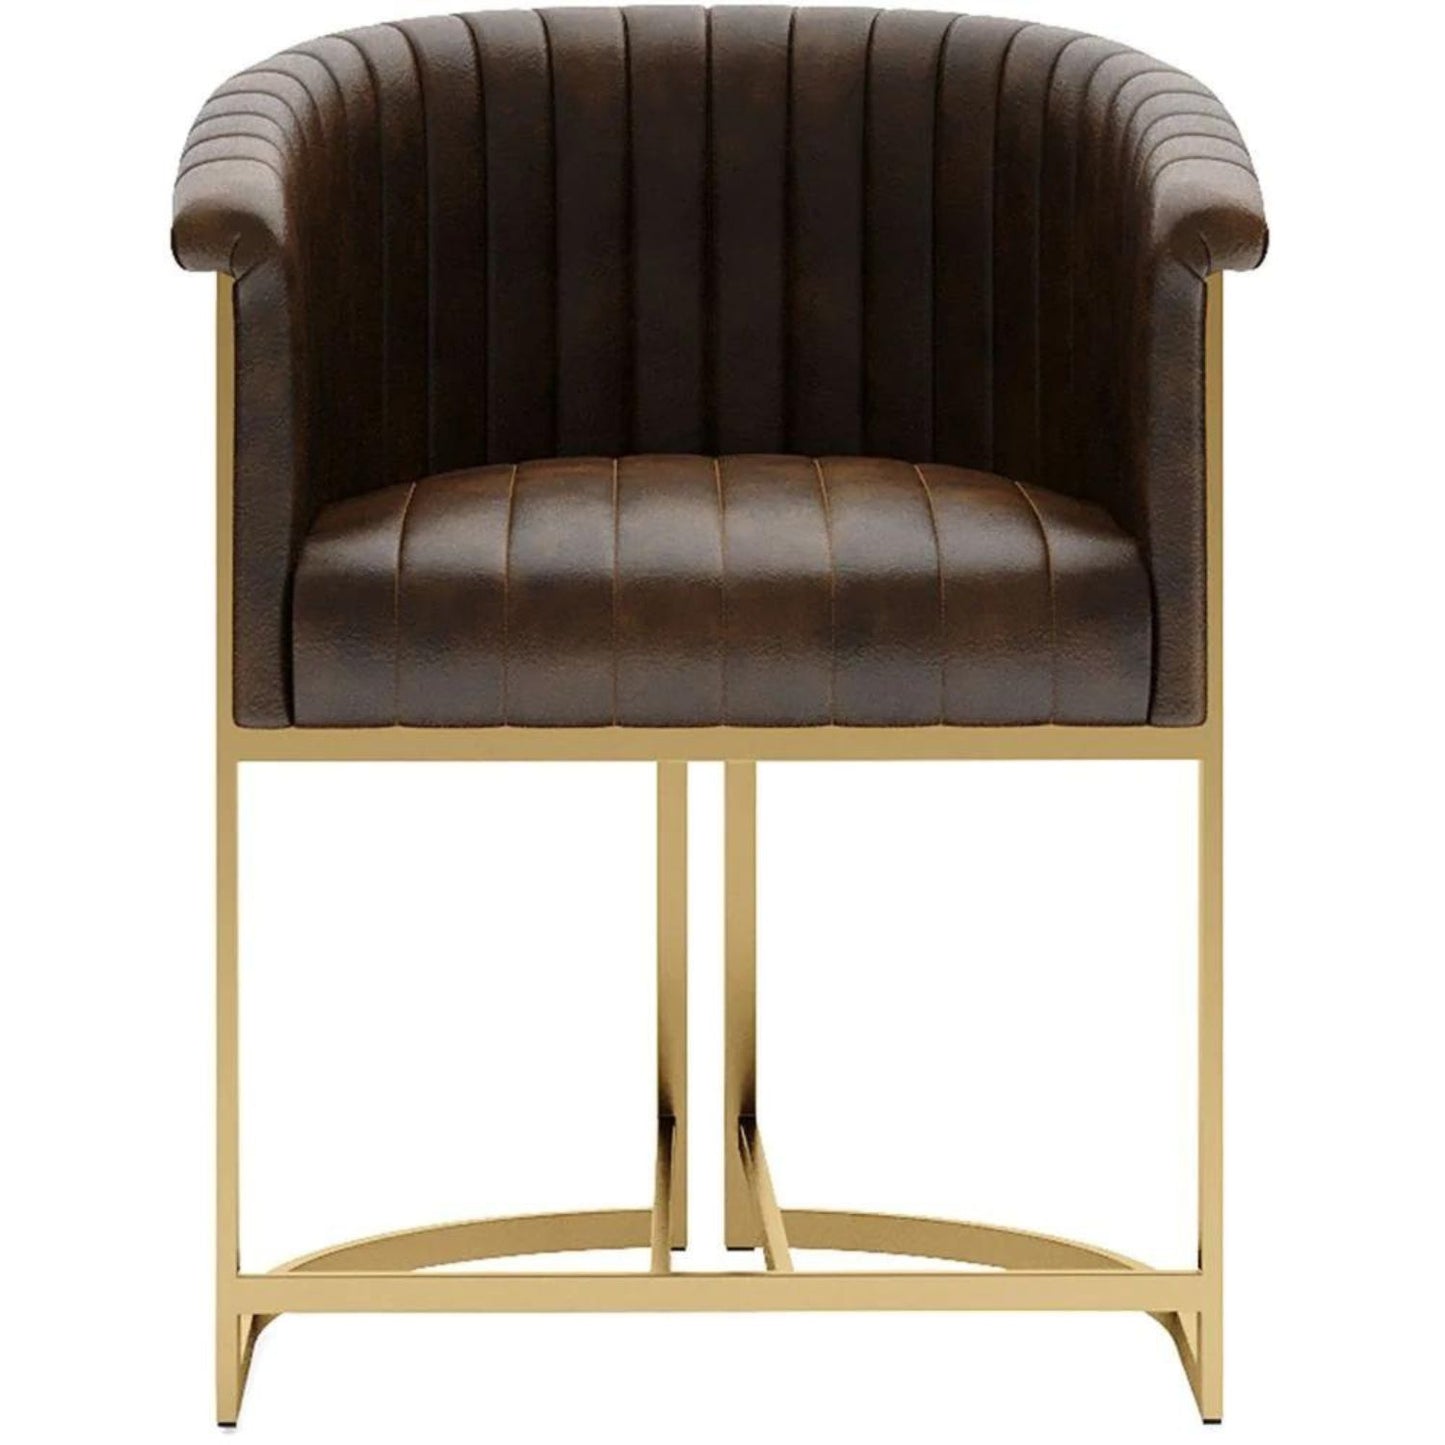 Brown and Gold Leather Chair